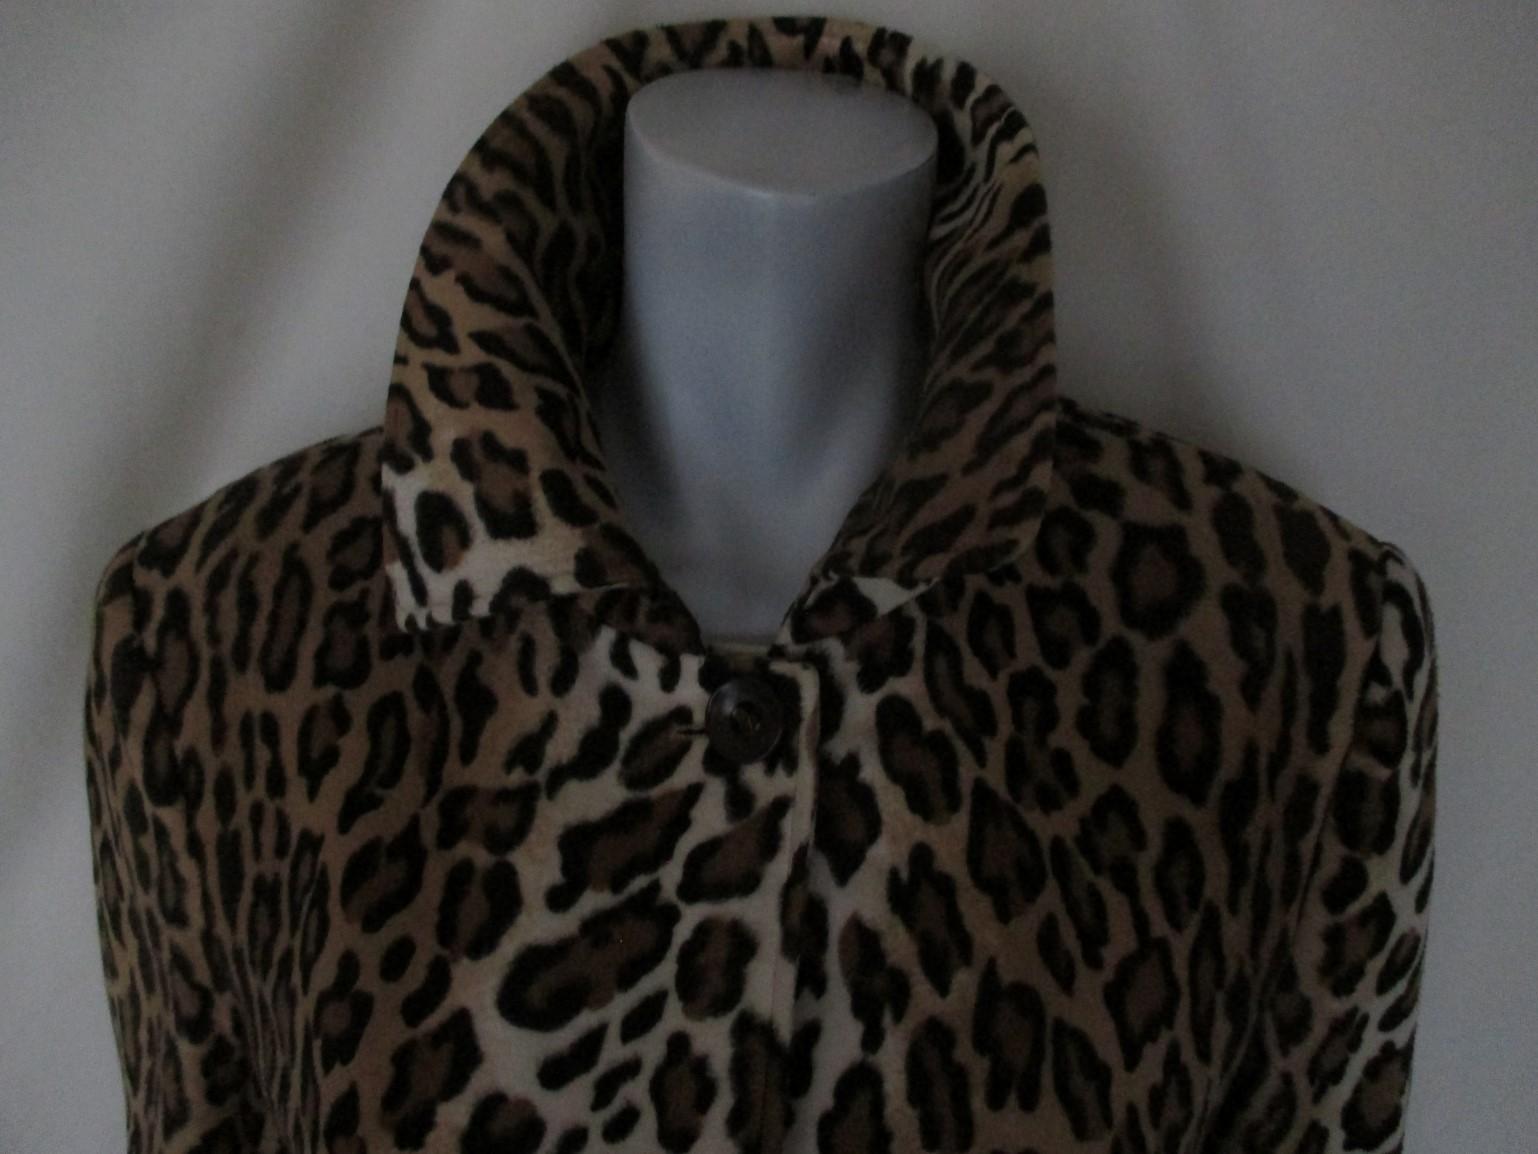 Moschino Cheap & Chic Leopard fake fur coat with 4 buttons, closing hook at the collar and 2 side pockets.
The material feels like velvet.
Size: US 14/ UK 16/  EU France 44- Italy 46

Please note that vintage items are not new and therefore might